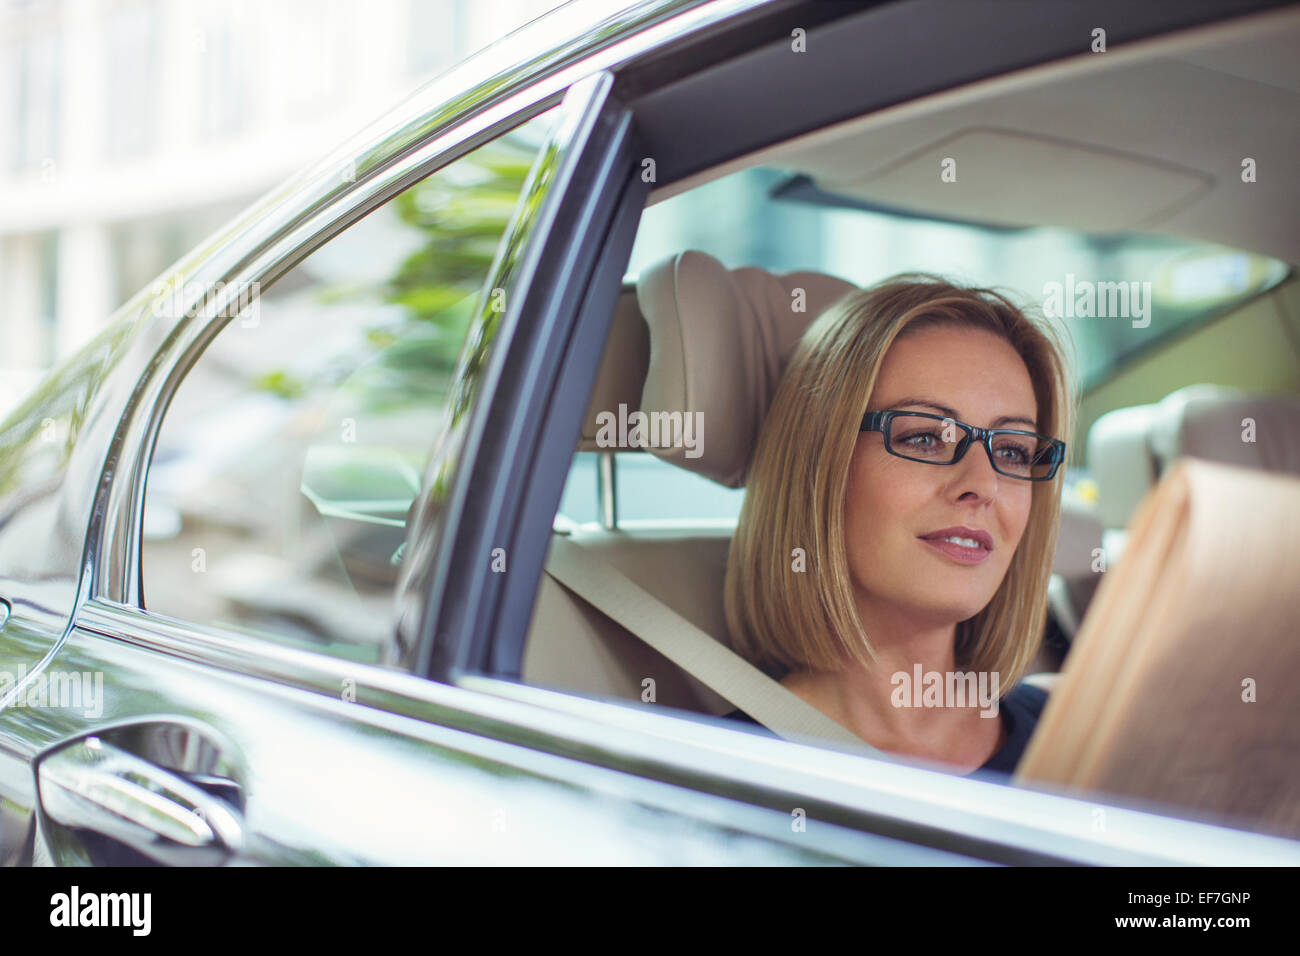 Businesswoman reading newspaper in back seat of car Stock Photo